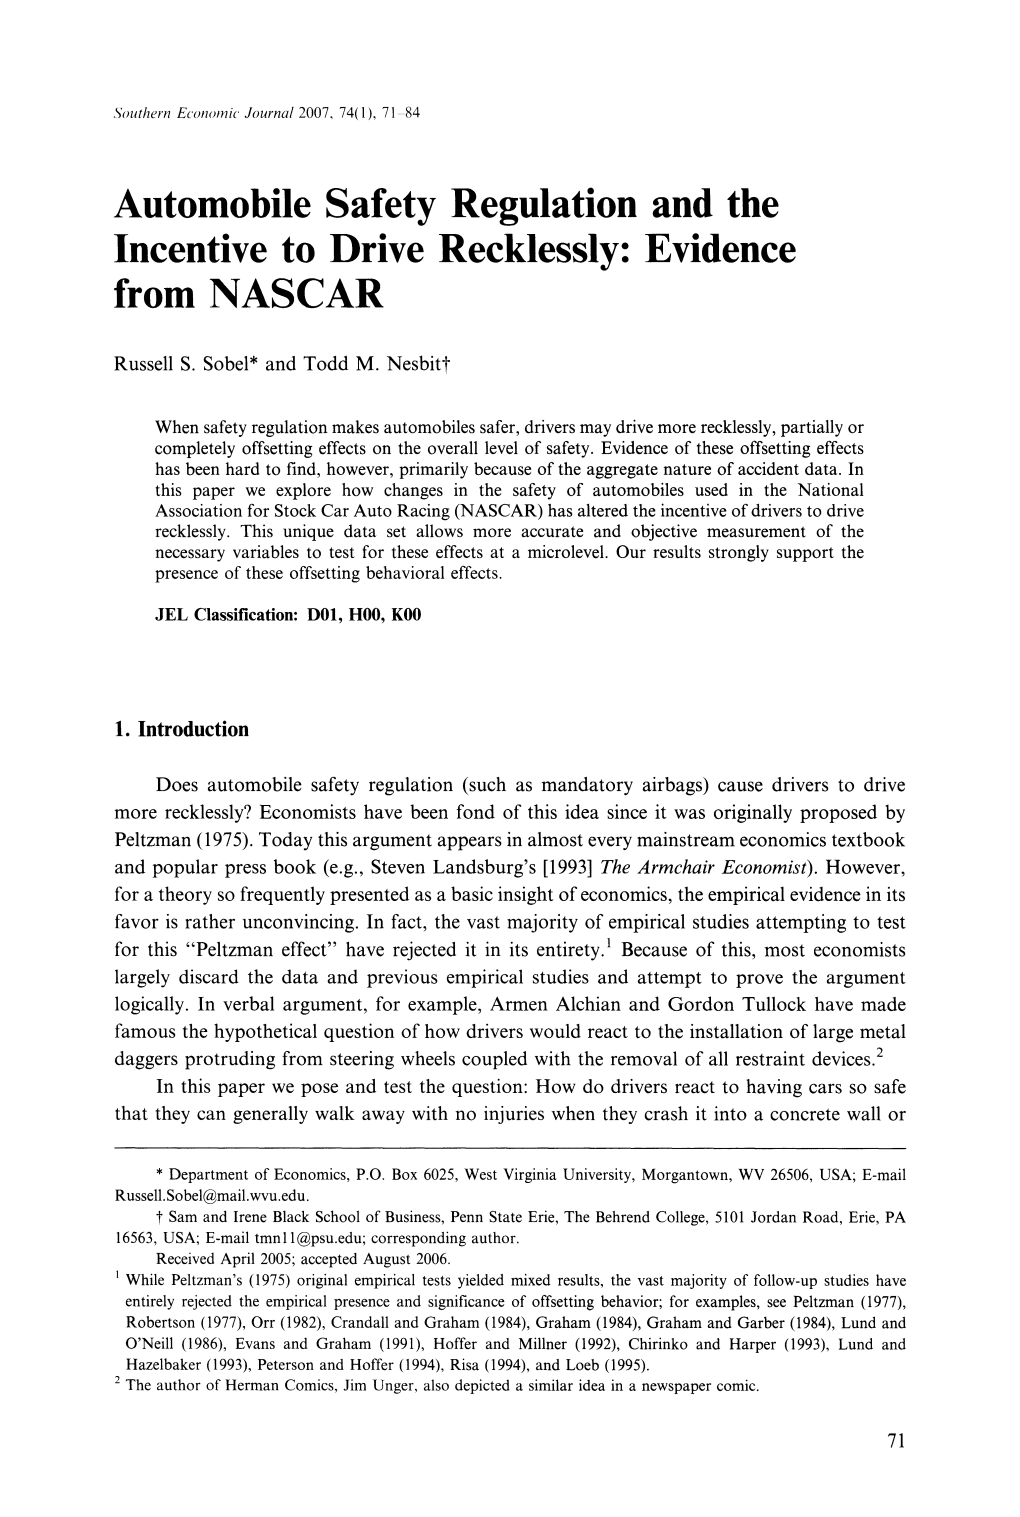 Automobile Safety Regulation and the Incentive to Drive Recklessly: Evidence Fromnascar